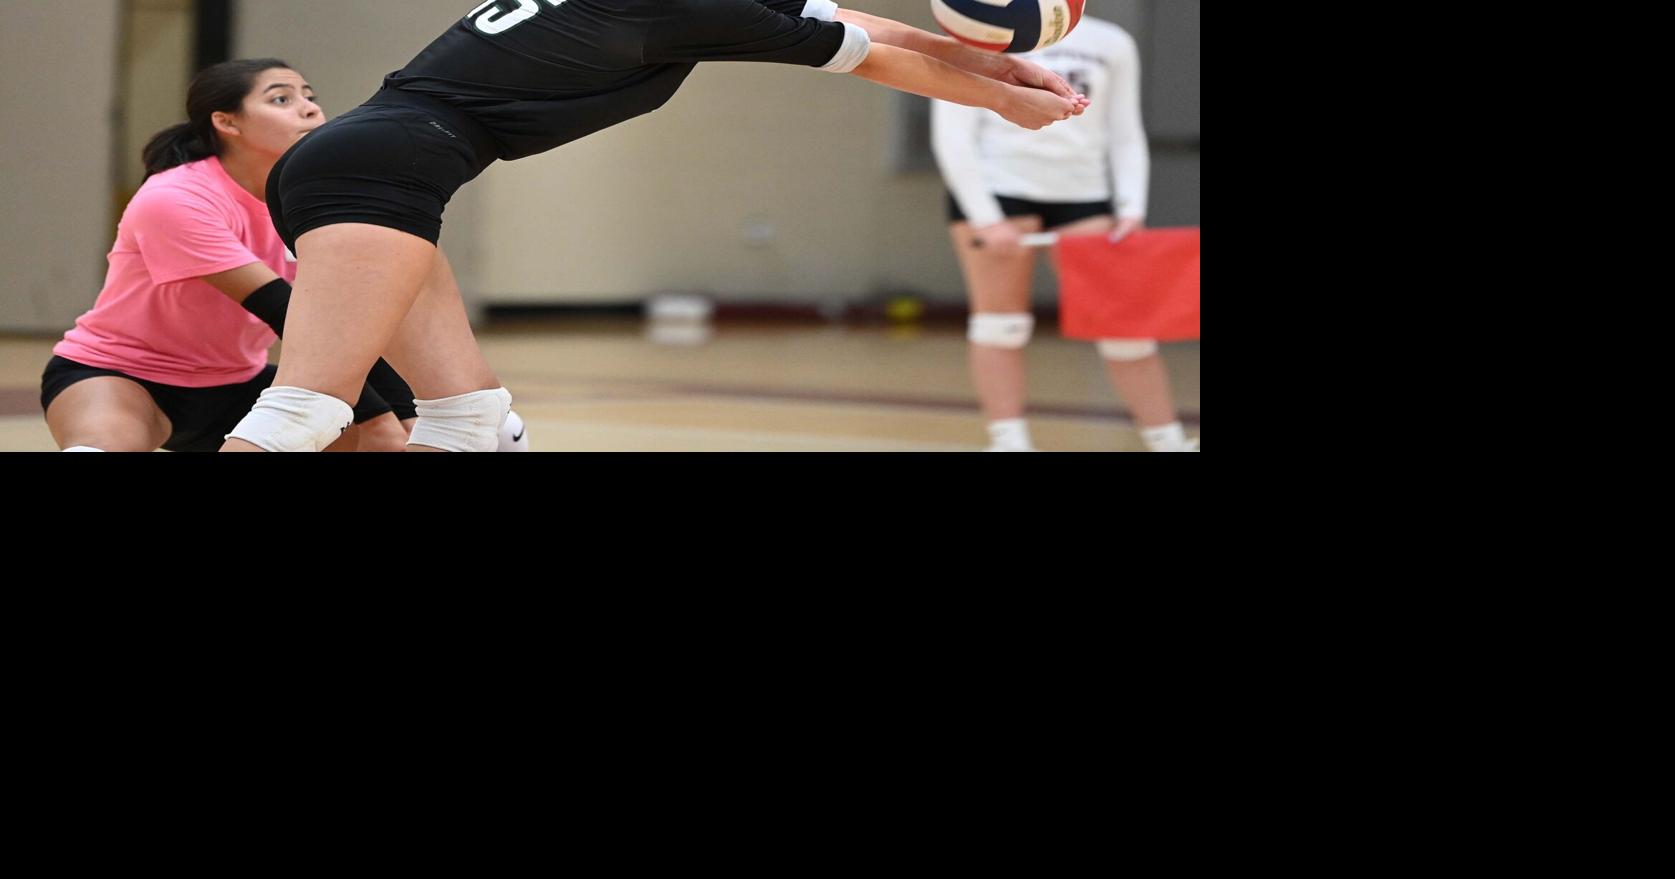 Shorts riding up all game : r/VolleyballGirls